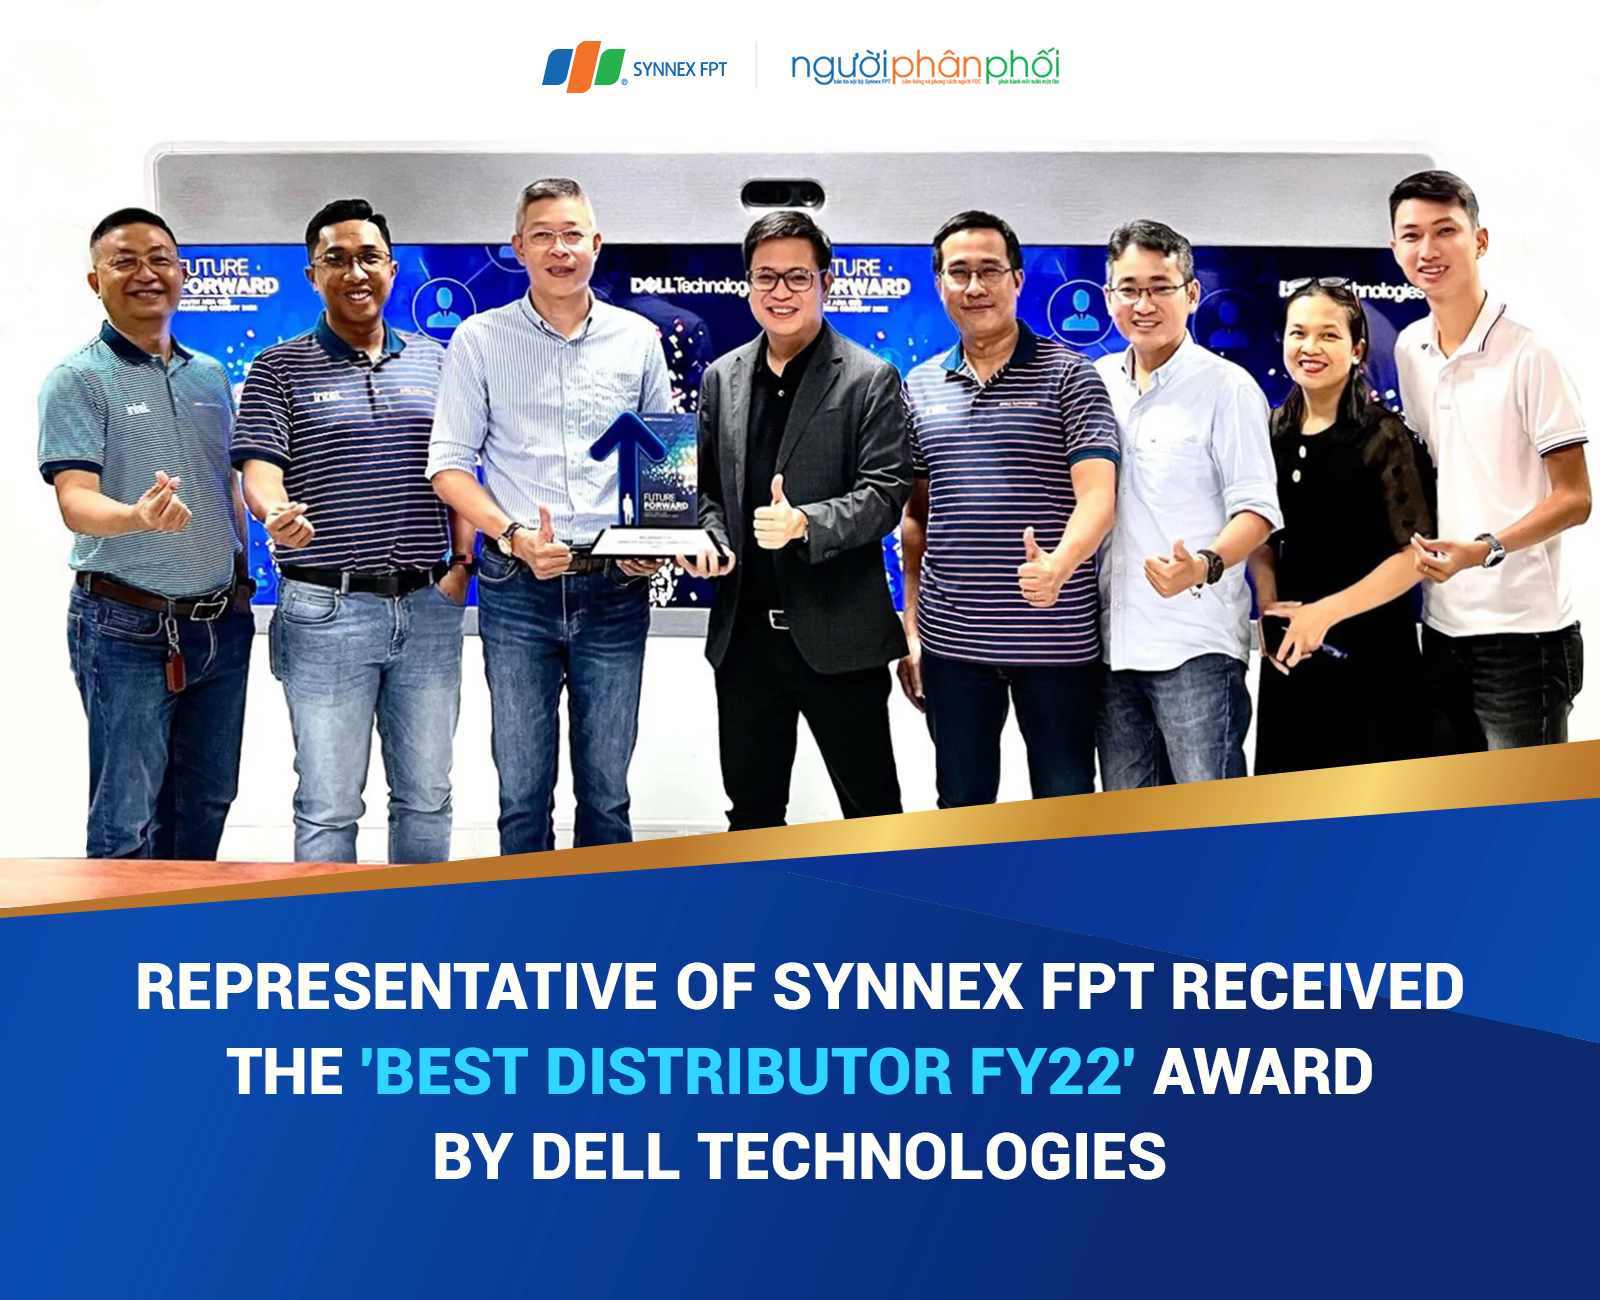 Synnex FPT is Dell Technologies’ best distributor in South Asia for 2 consecutive years